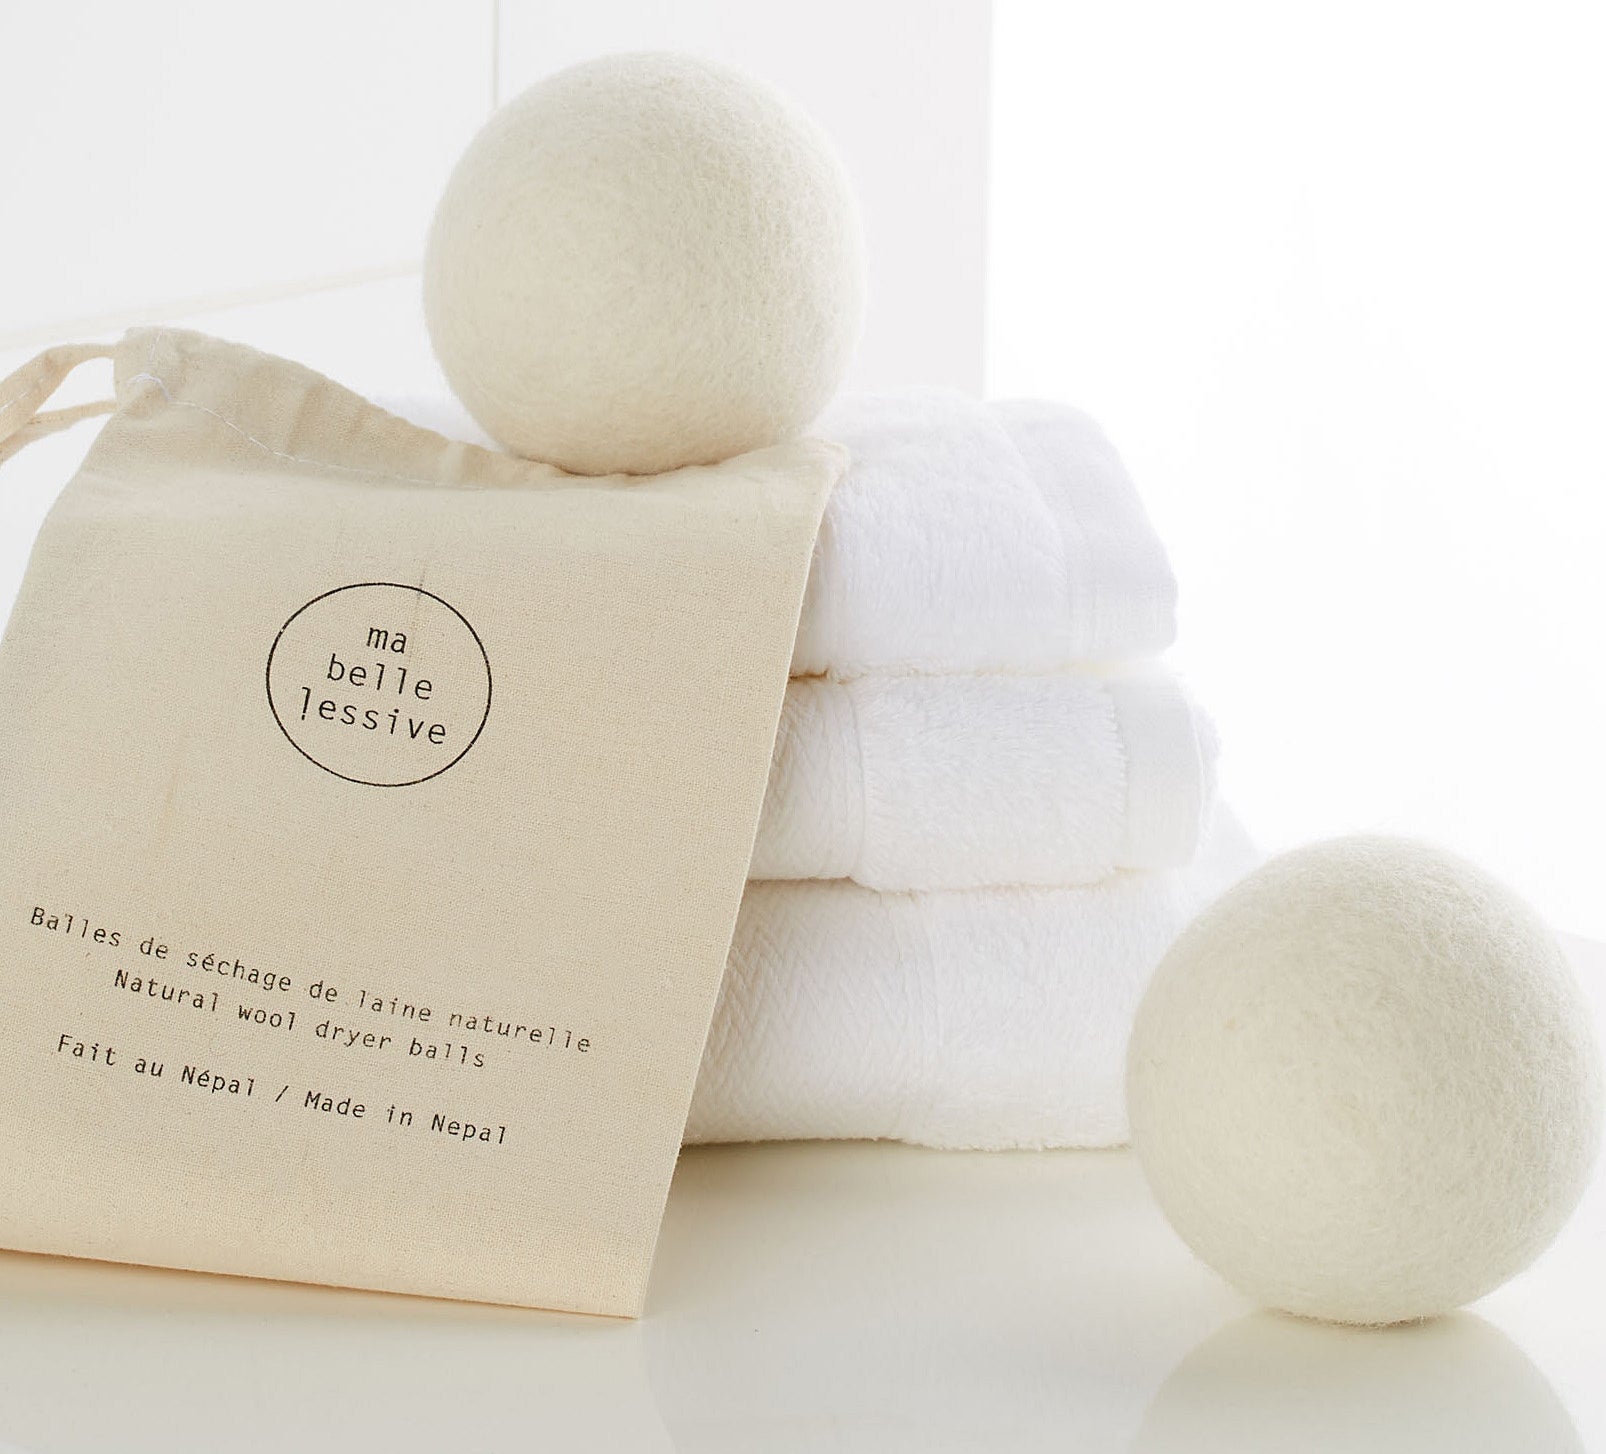 Two wool balls on a stack of towels